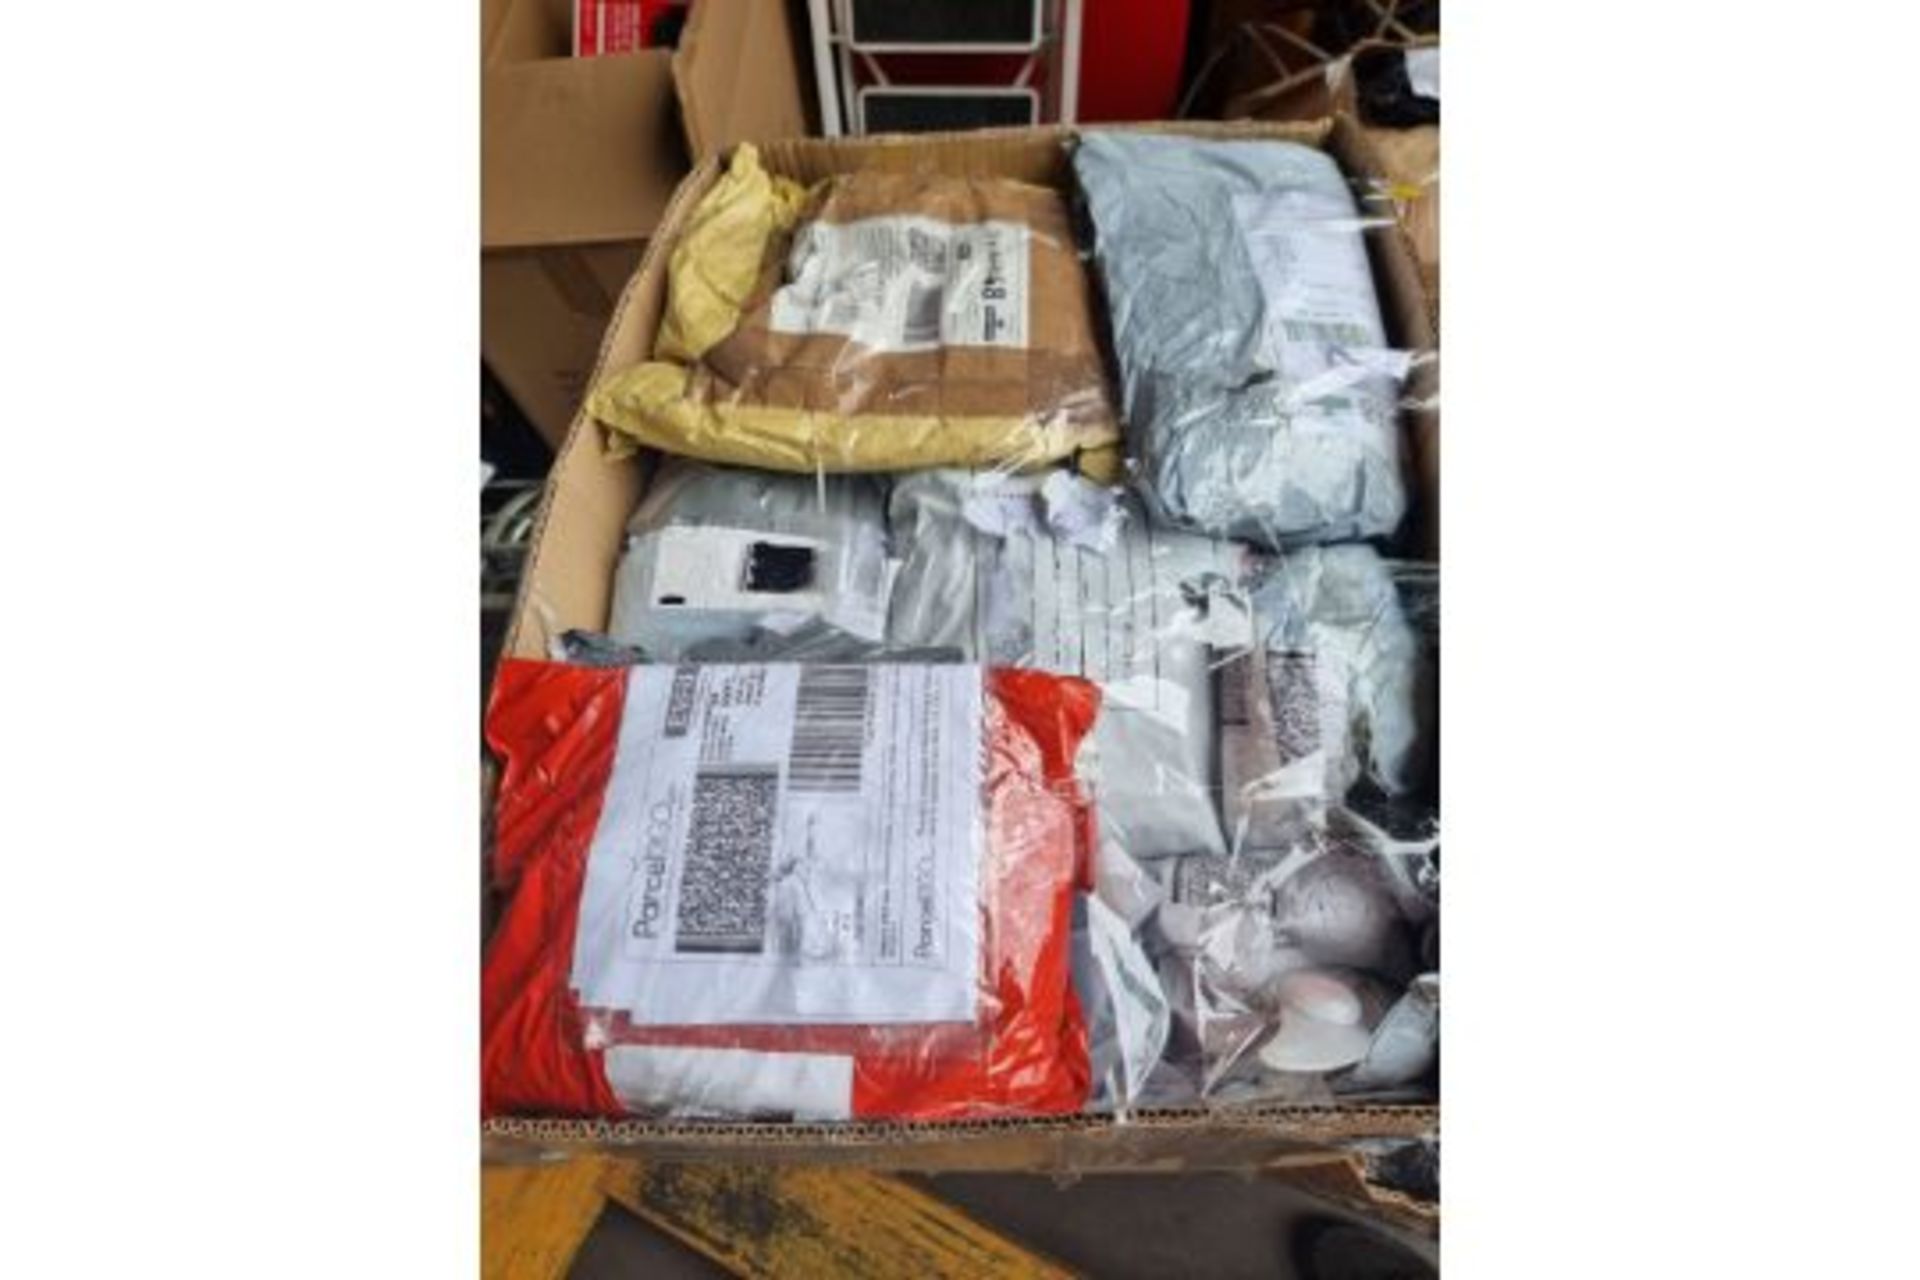 TRADE LOT TO CONTAIN 100 x UNCHECKED COURIER/INTERNET RETURNS. CONDITION & ITEMS UNKNOWN. ITEMS WILL - Bild 5 aus 9